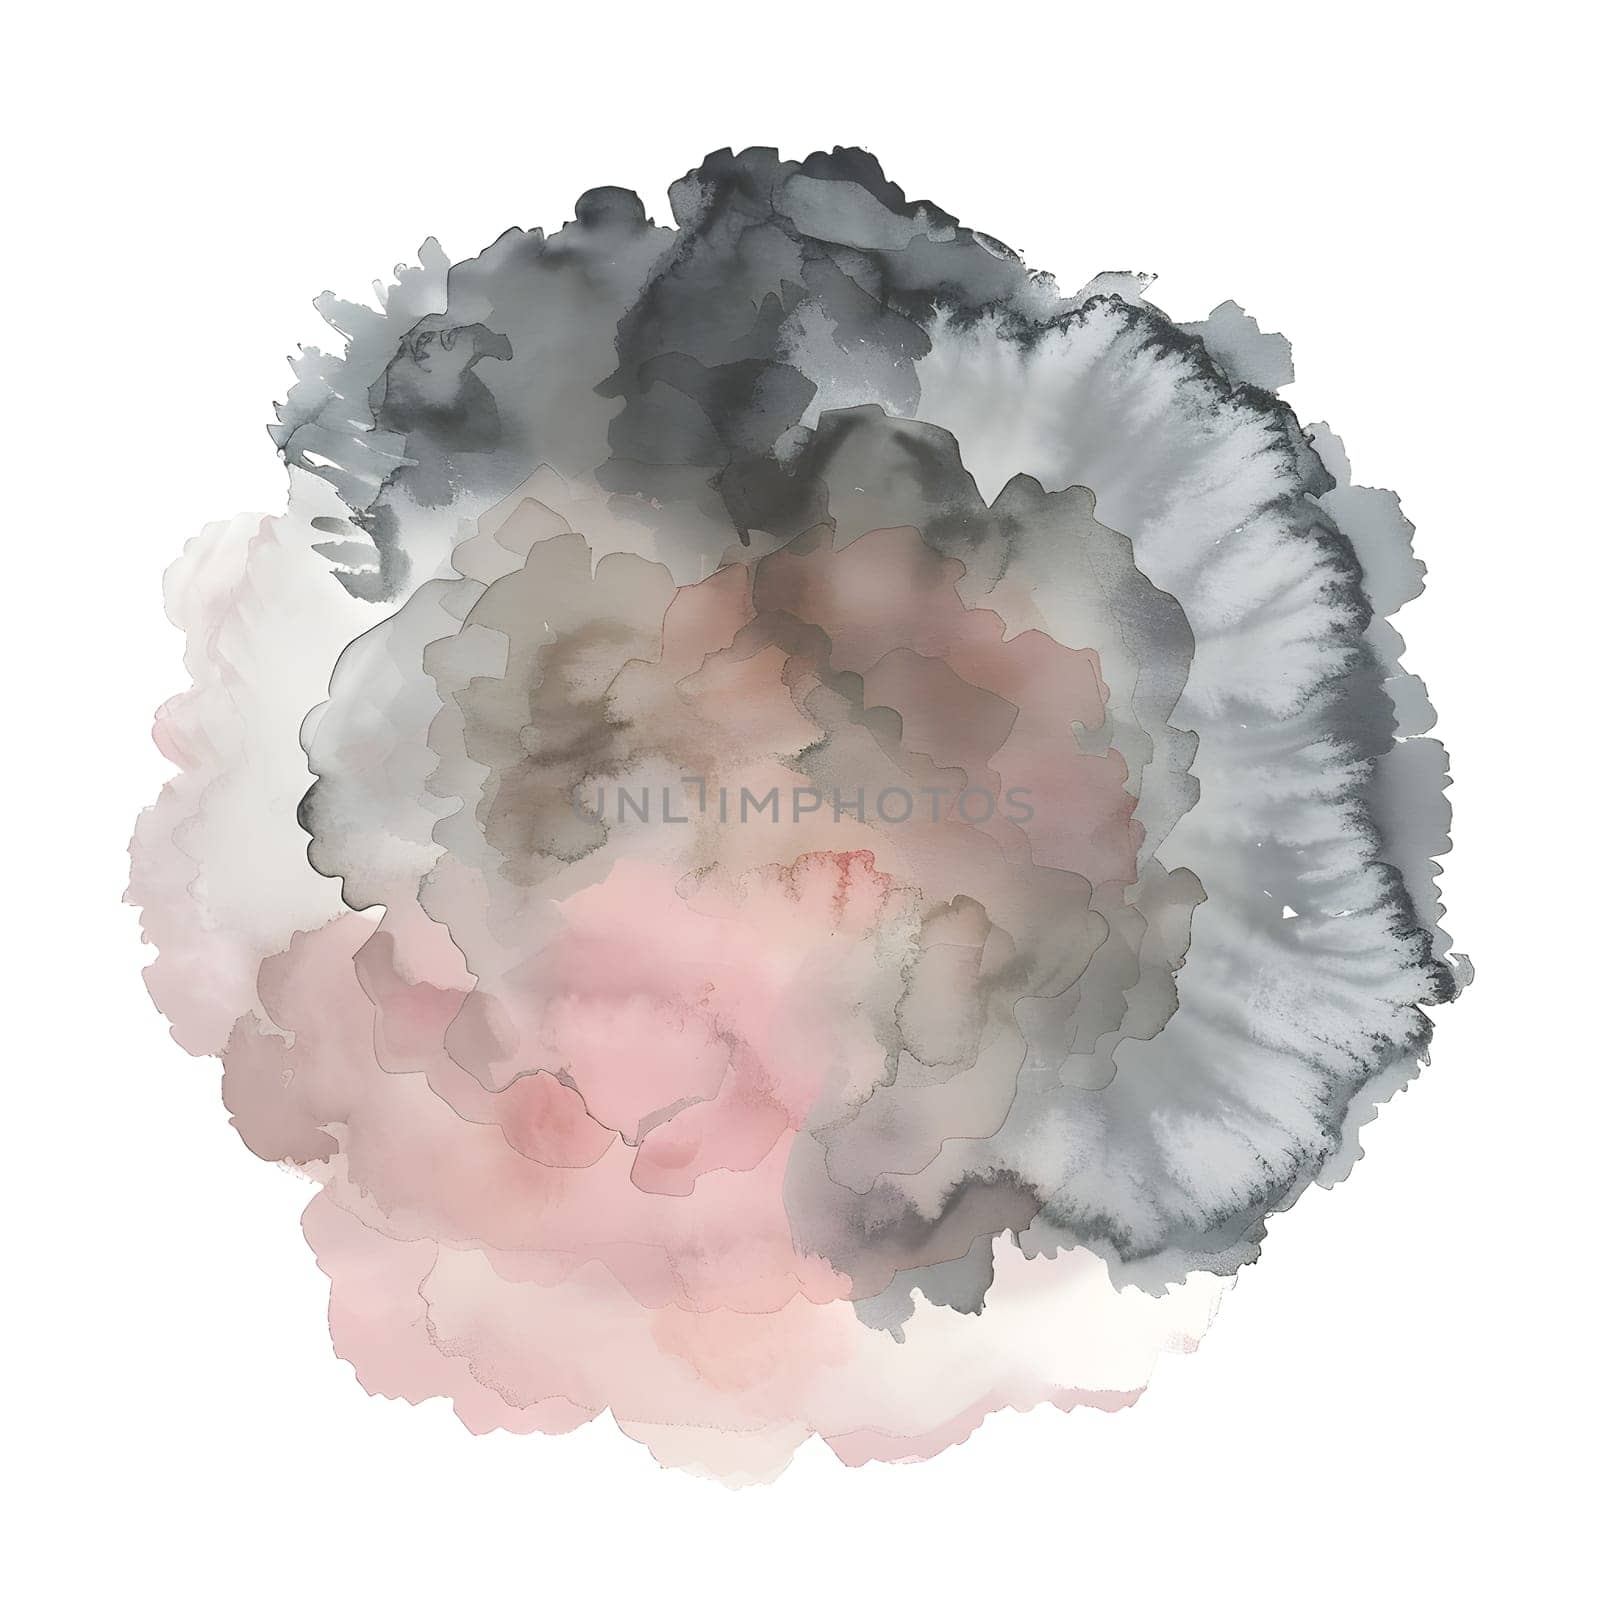 Art of a gray and pink circle on white background using watercolor paint by Nadtochiy